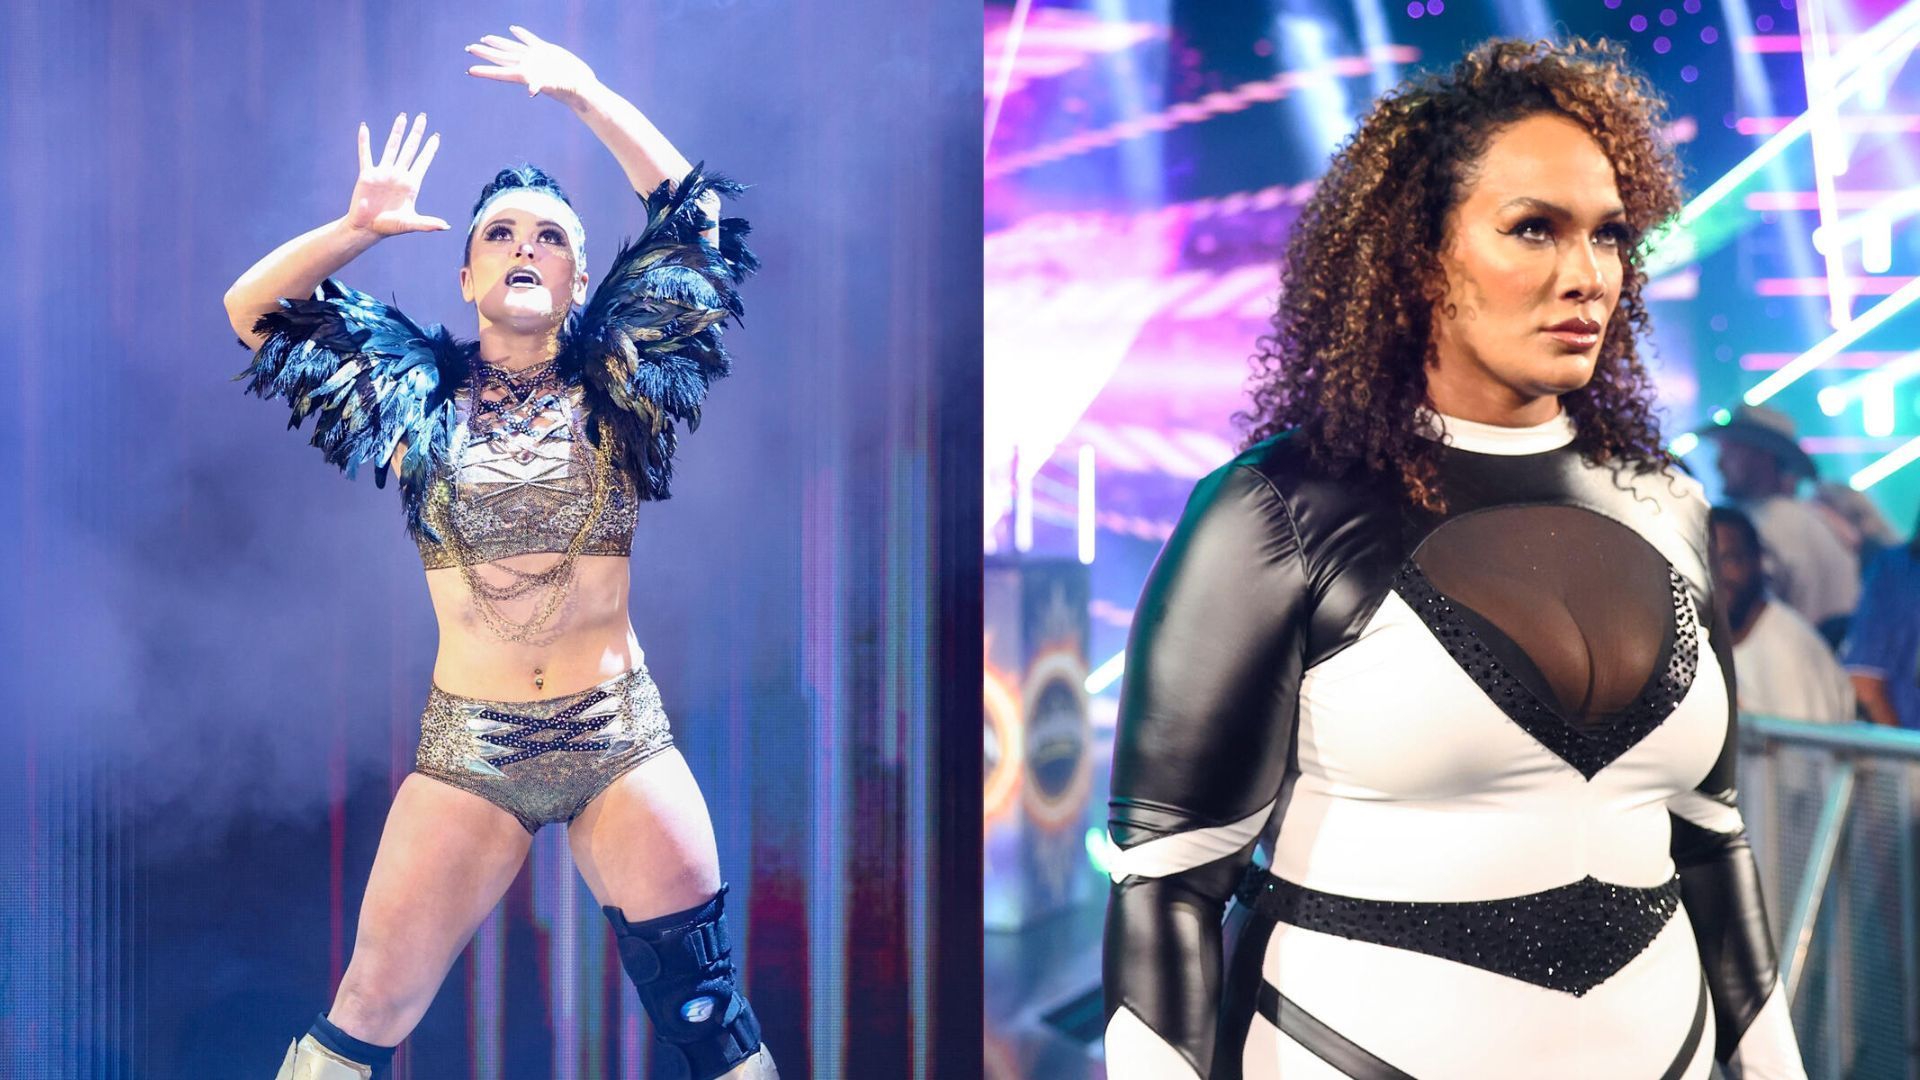 Lyra Valkyria and Nia Jax will face each other in the finals of the Queen of the Ring tournament 